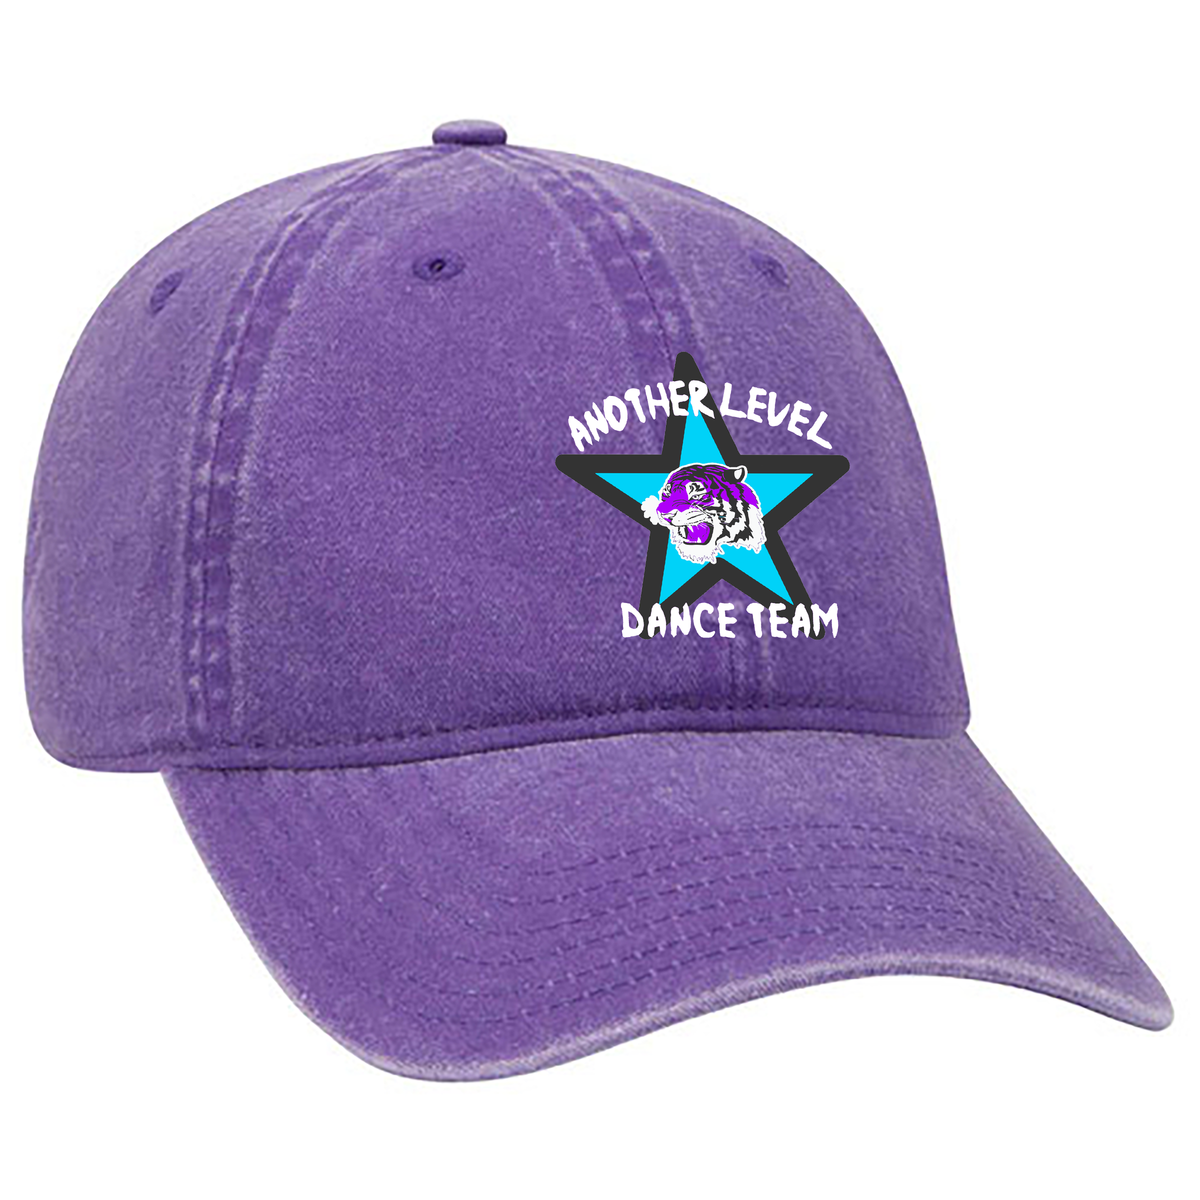 Another Level Dance Team Low Profile Dad Hat